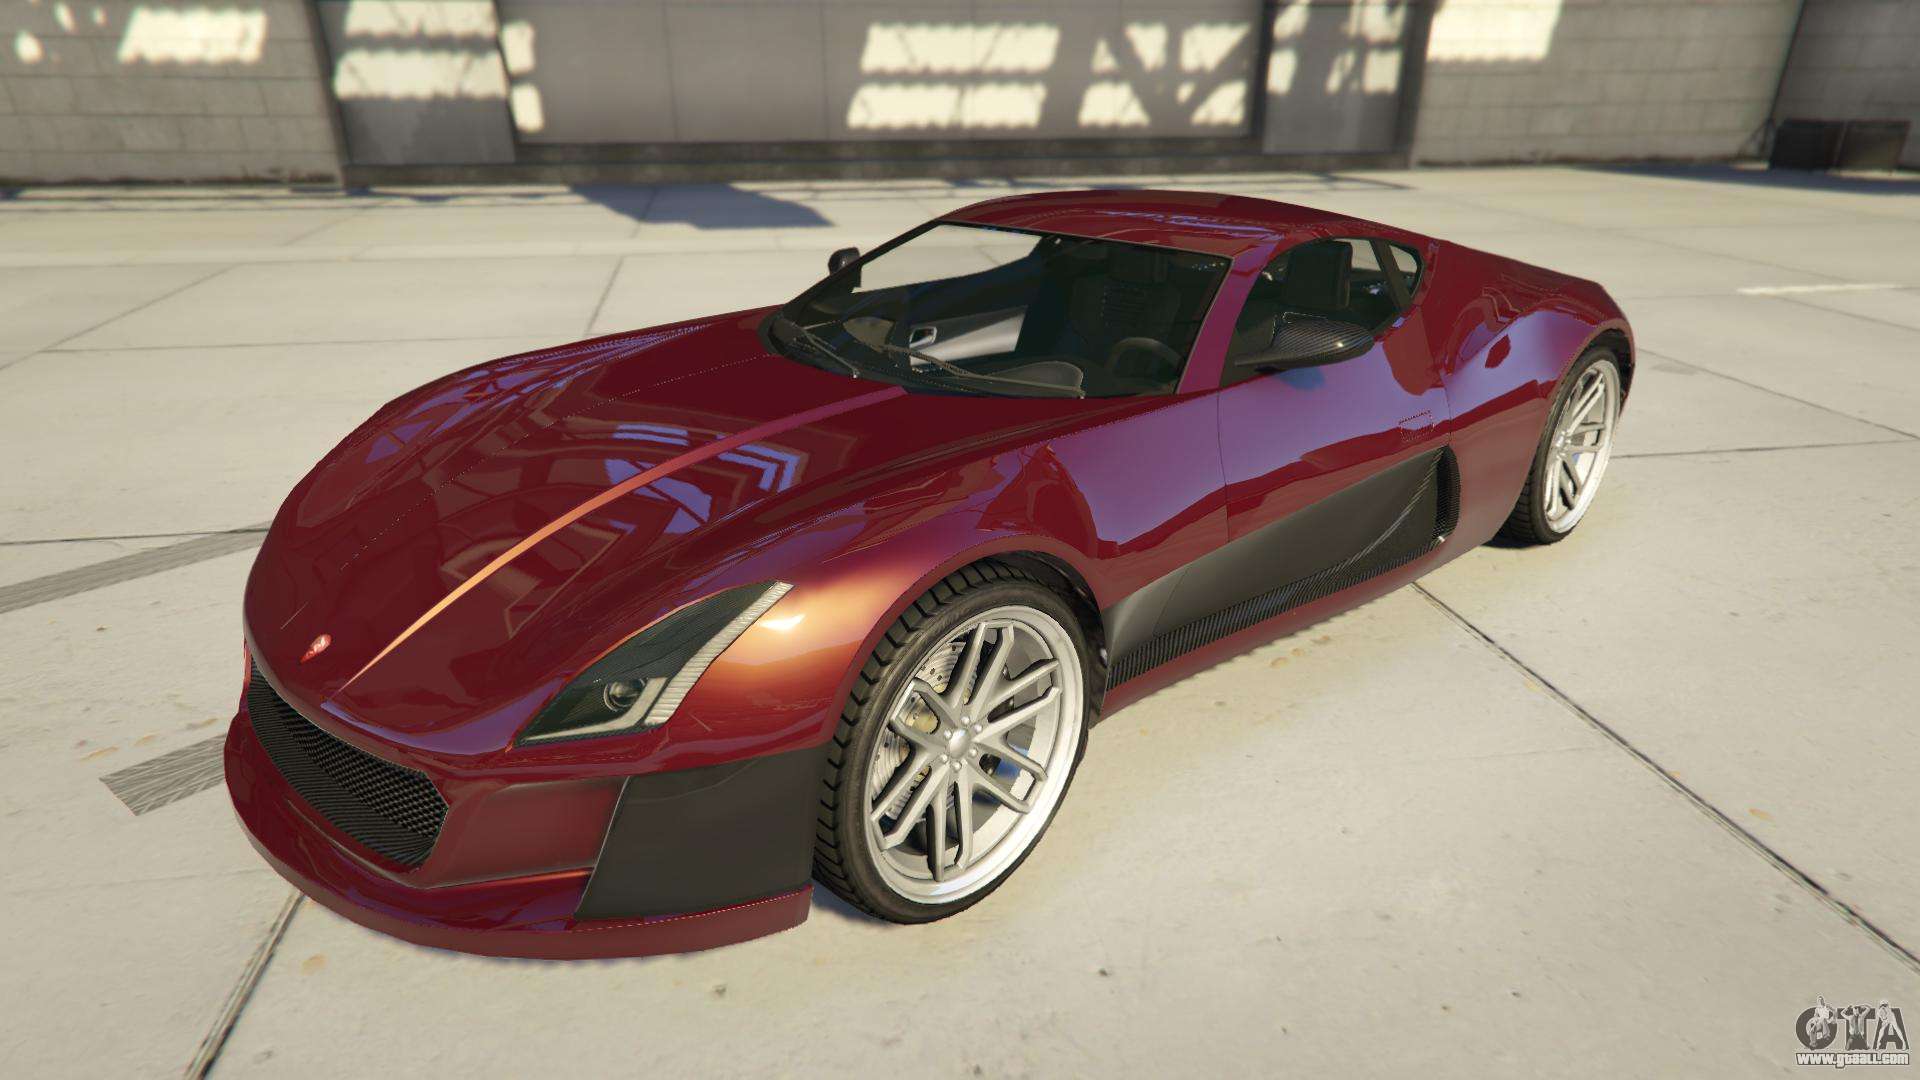 Coil Cyclone from GTA Online